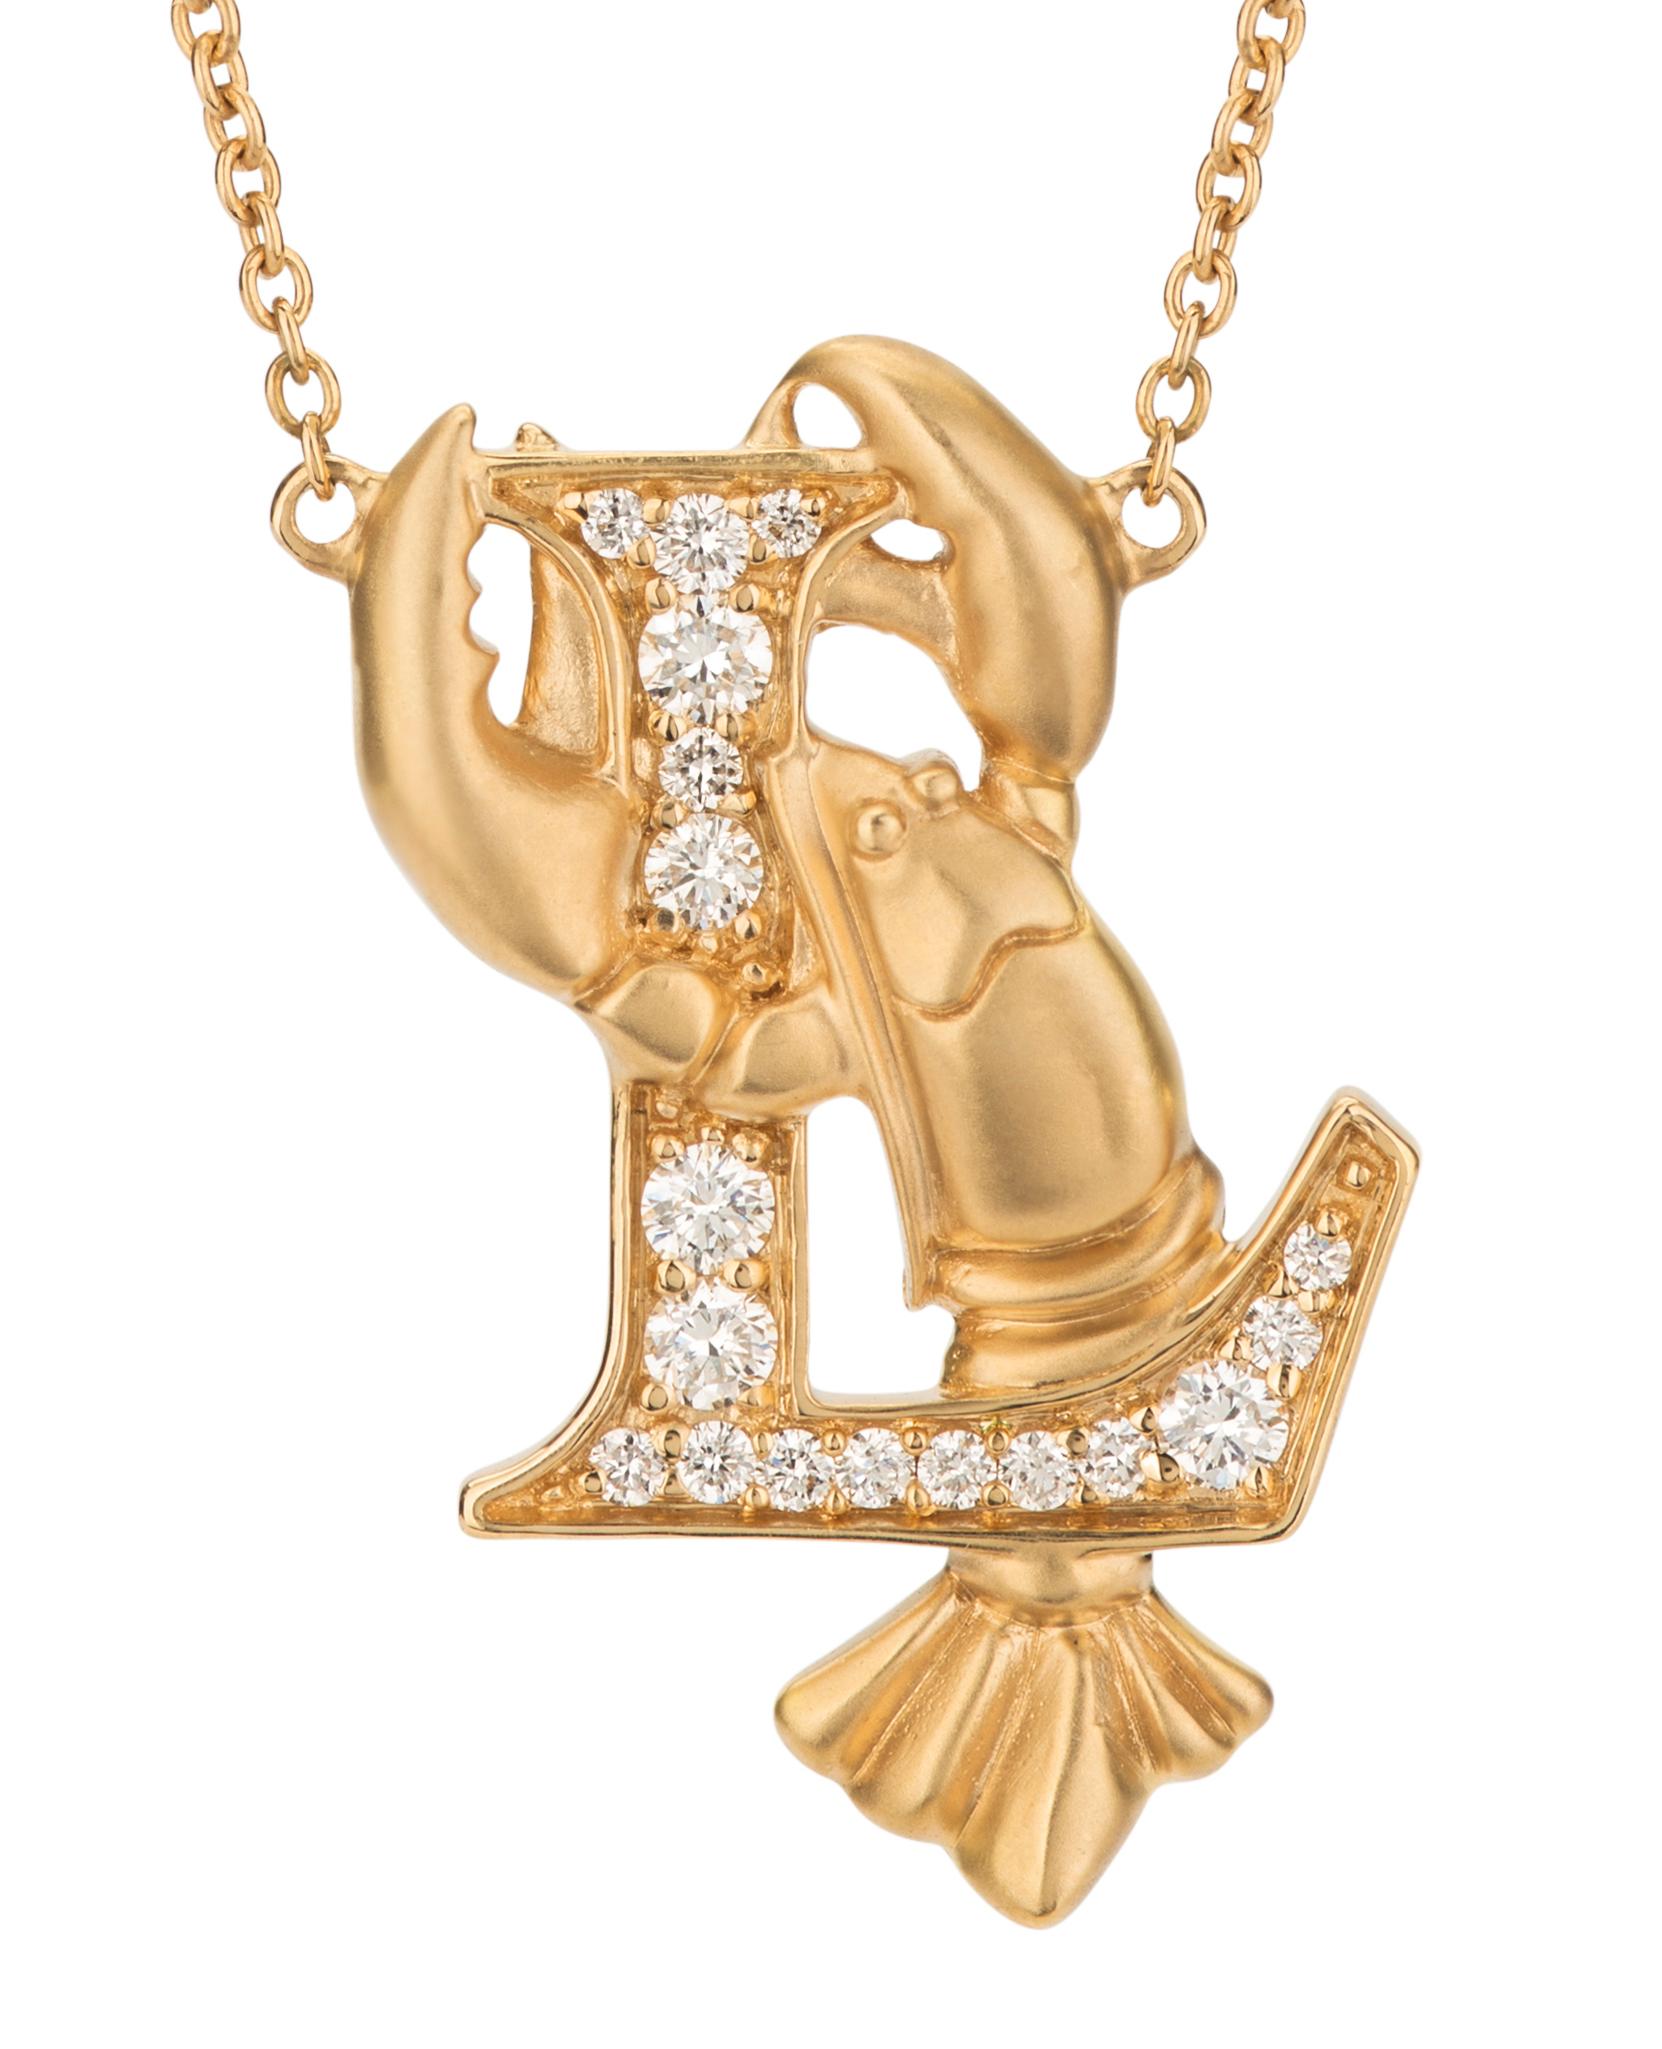 Celebrate your initials with our ‘L is for Lobster’ diamond necklace. Set on a 42cm gold chain this detailed piece boasts an 18-karat yellow gold matt finish lobster entwined within a white diamond letter L.

Each necklace is accompanied by Stephen